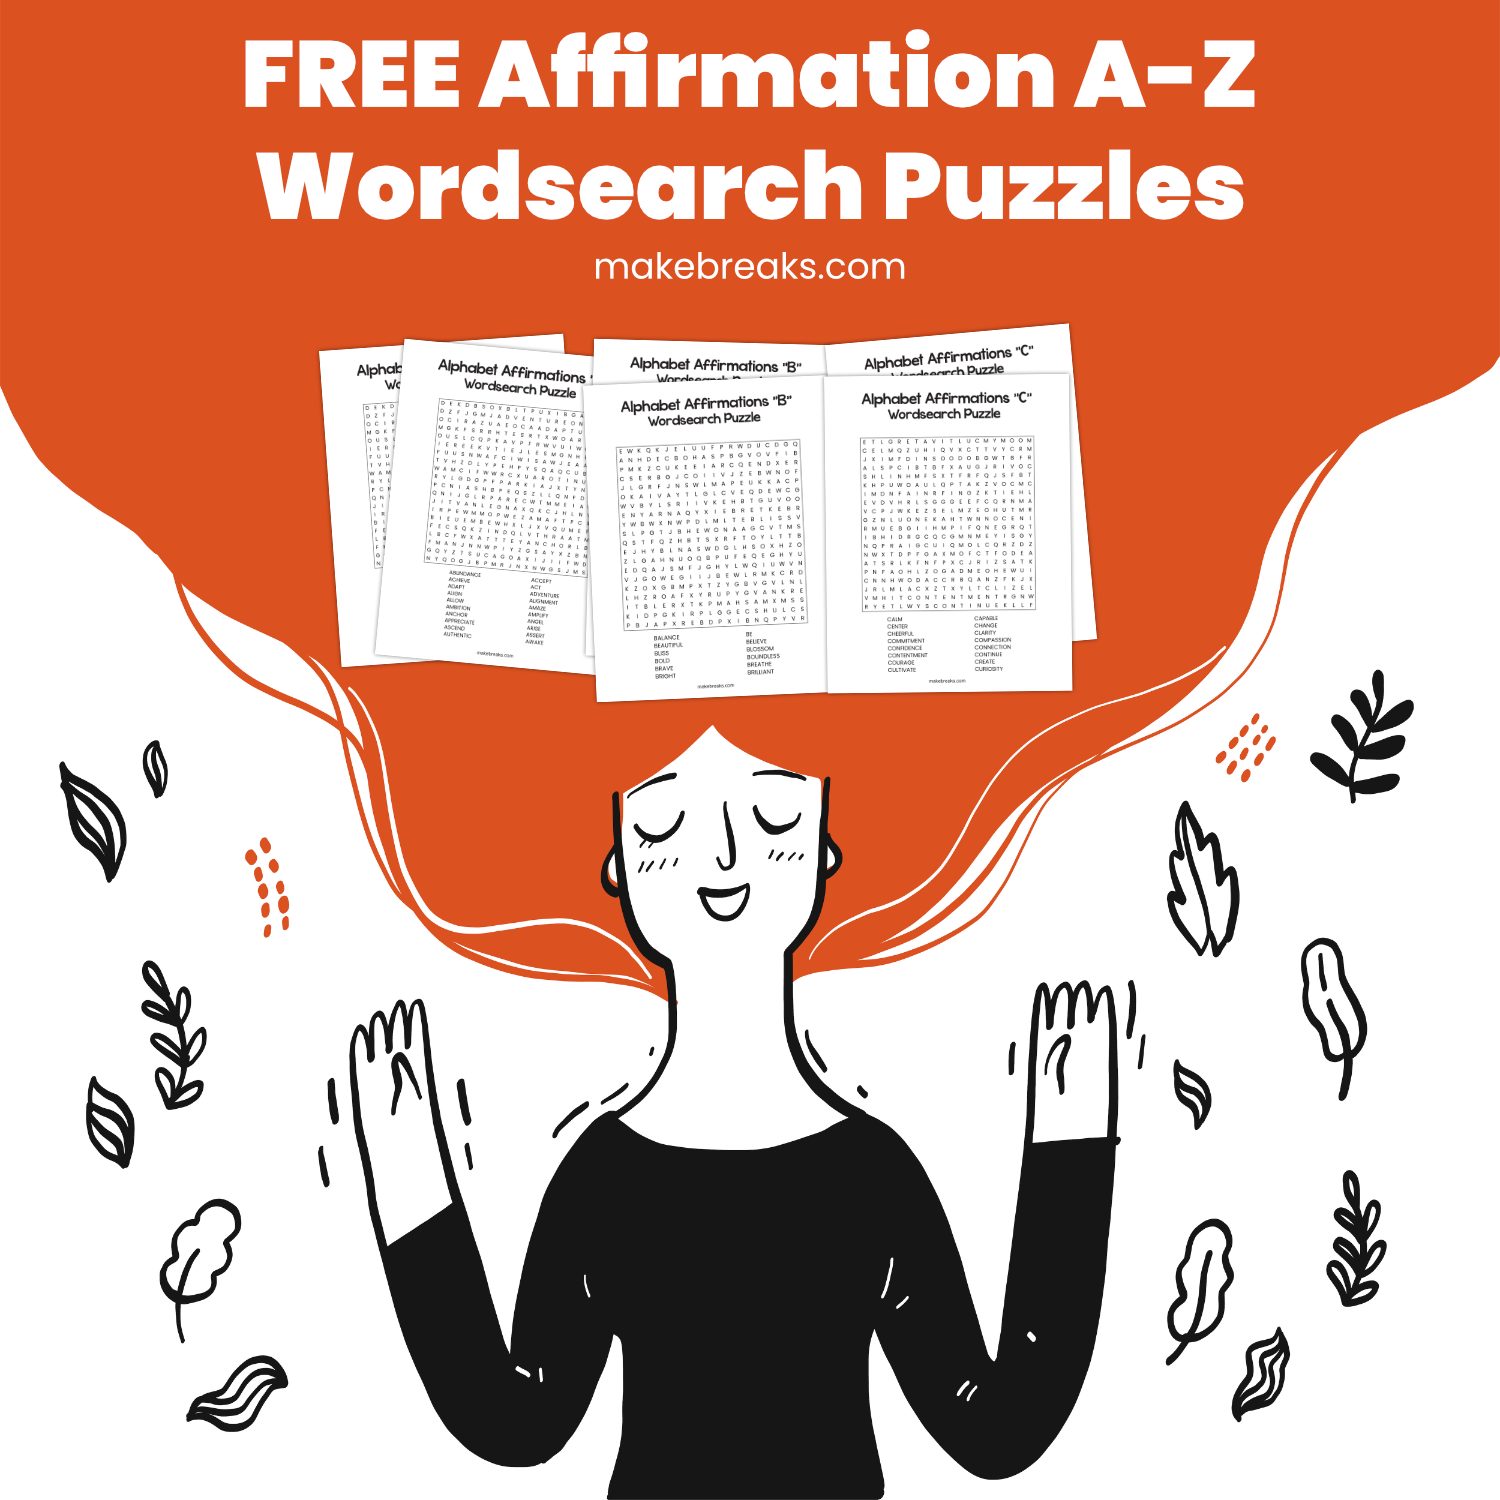 16 Free Printable A-Z Affirmation Wordsearch Puzzles